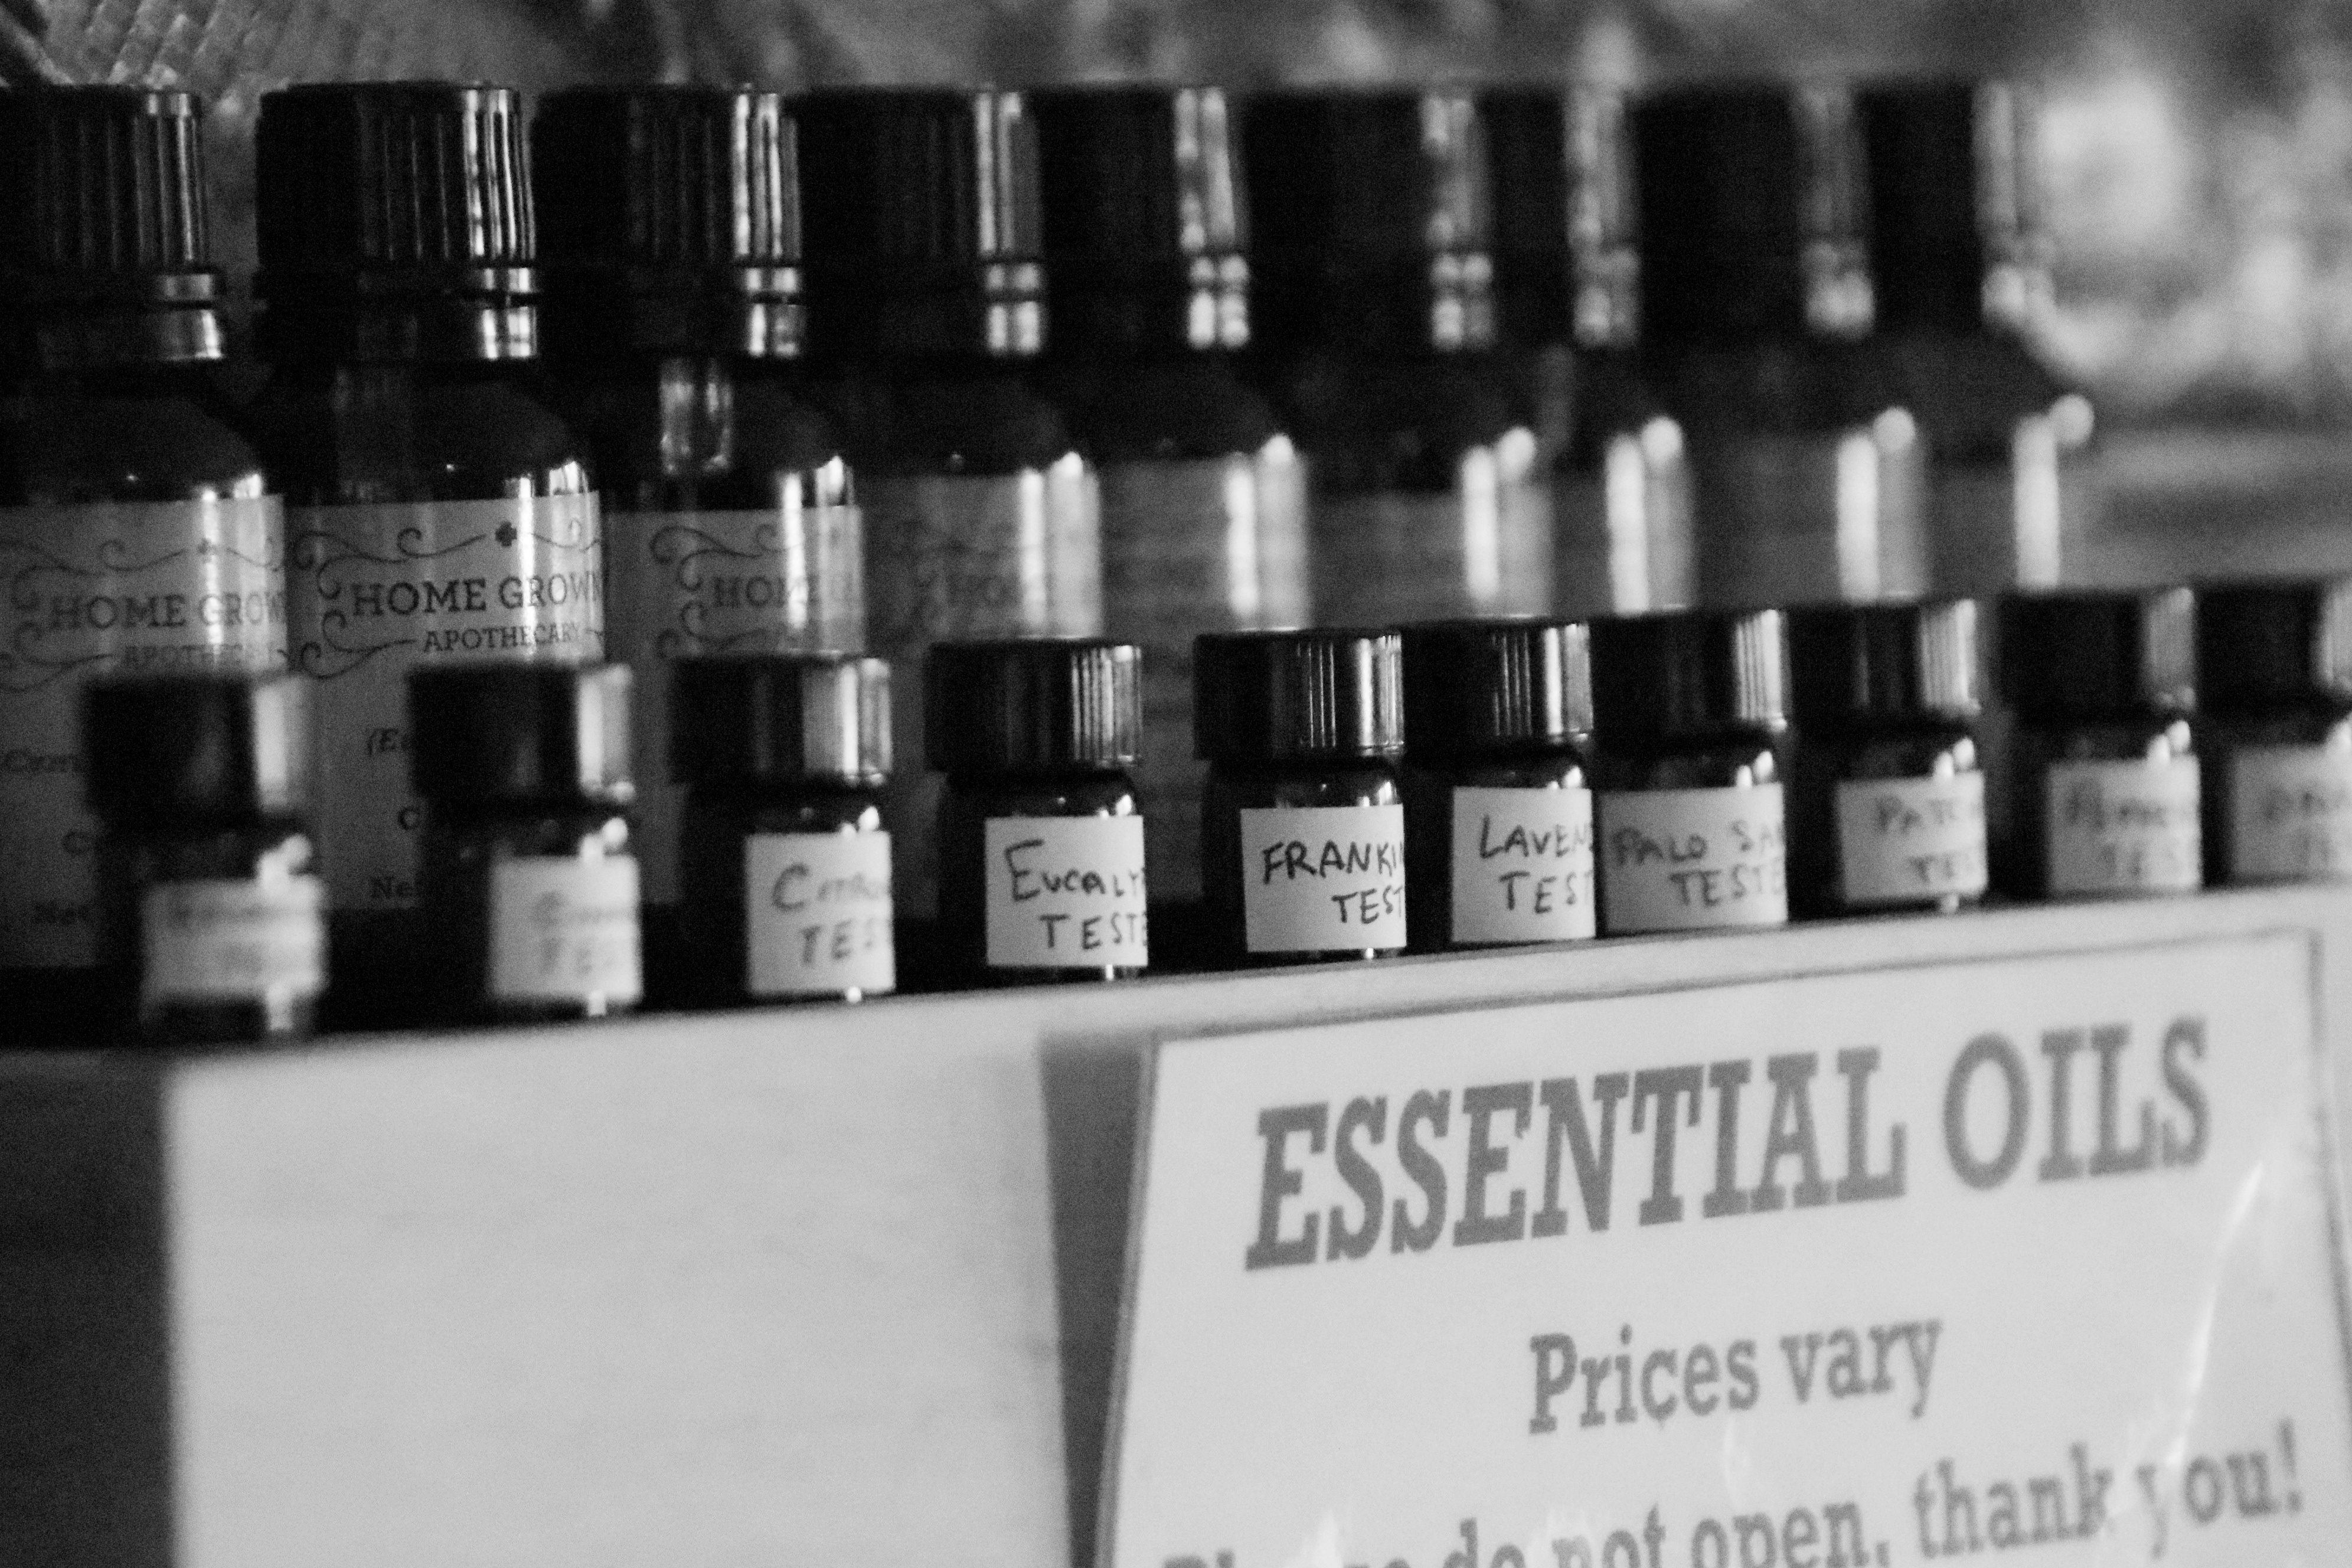 Essential Oils from Home Grown Apothecary